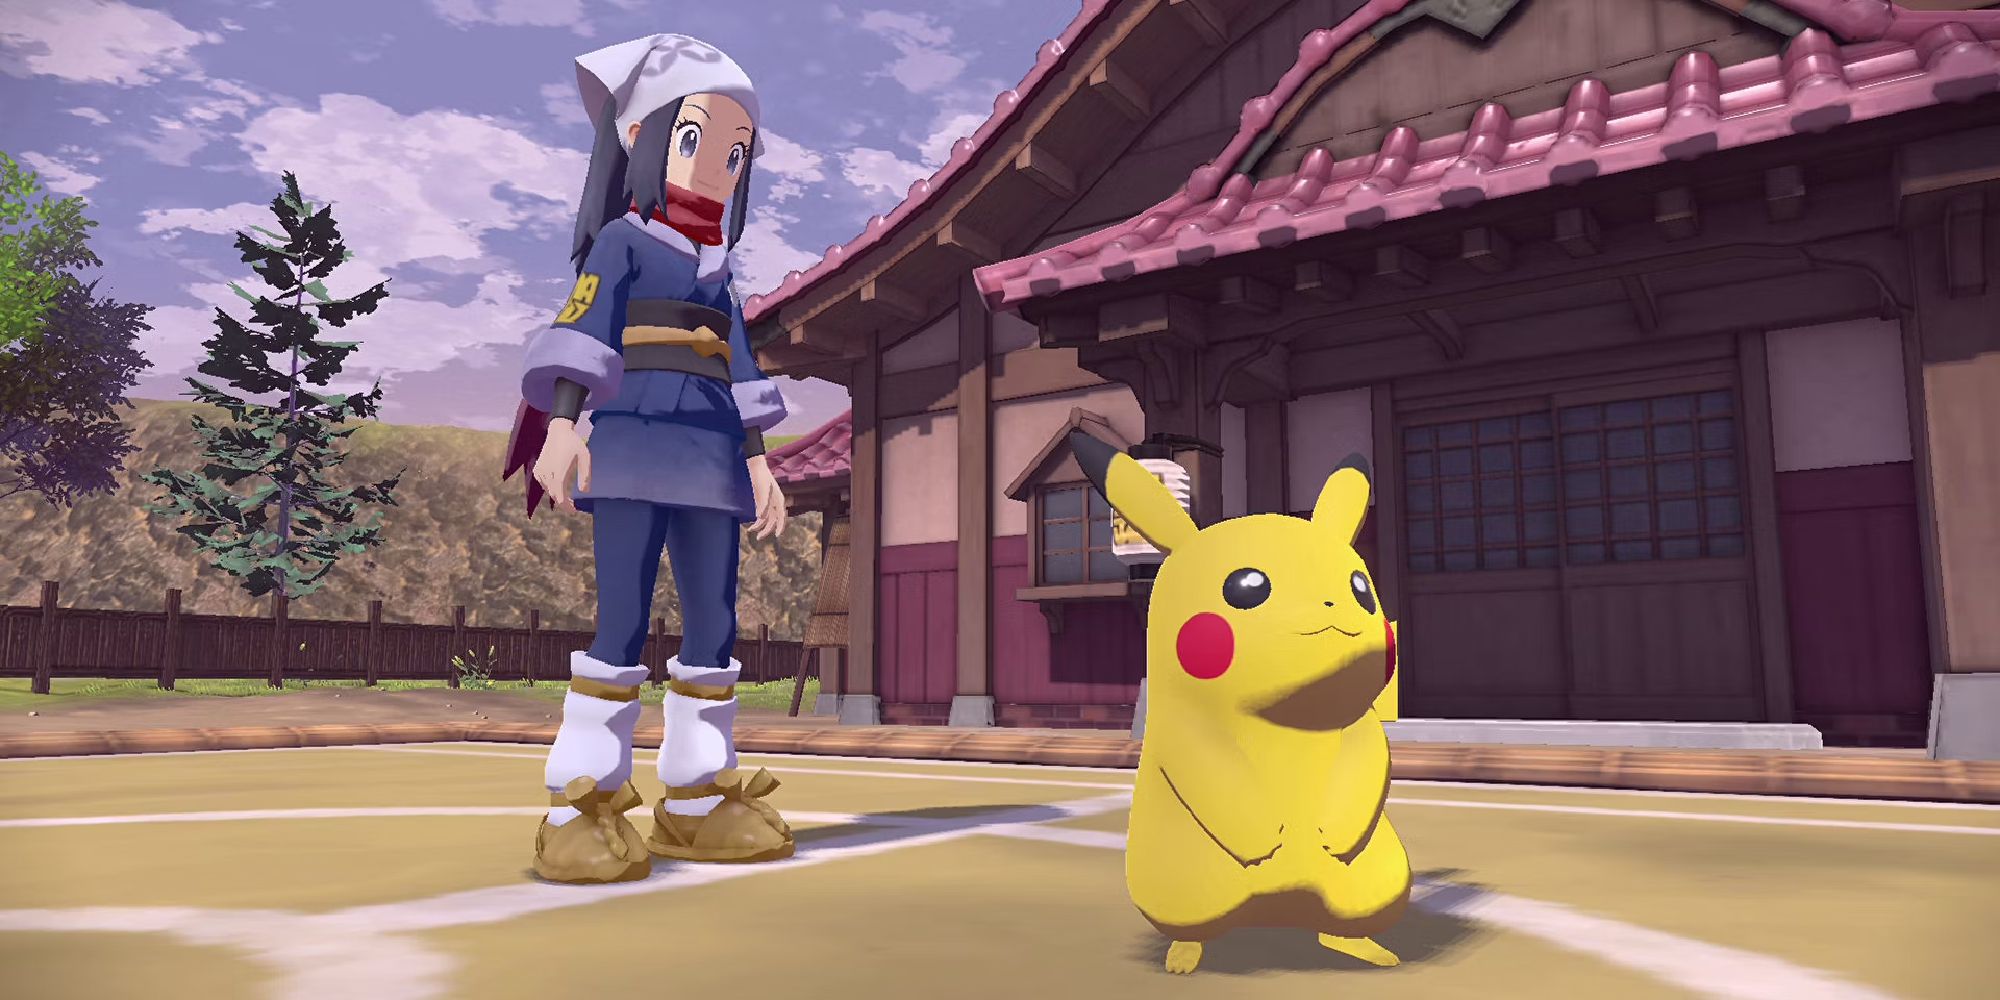 Pikachu standing by the player in Pokemon Legends Arceus